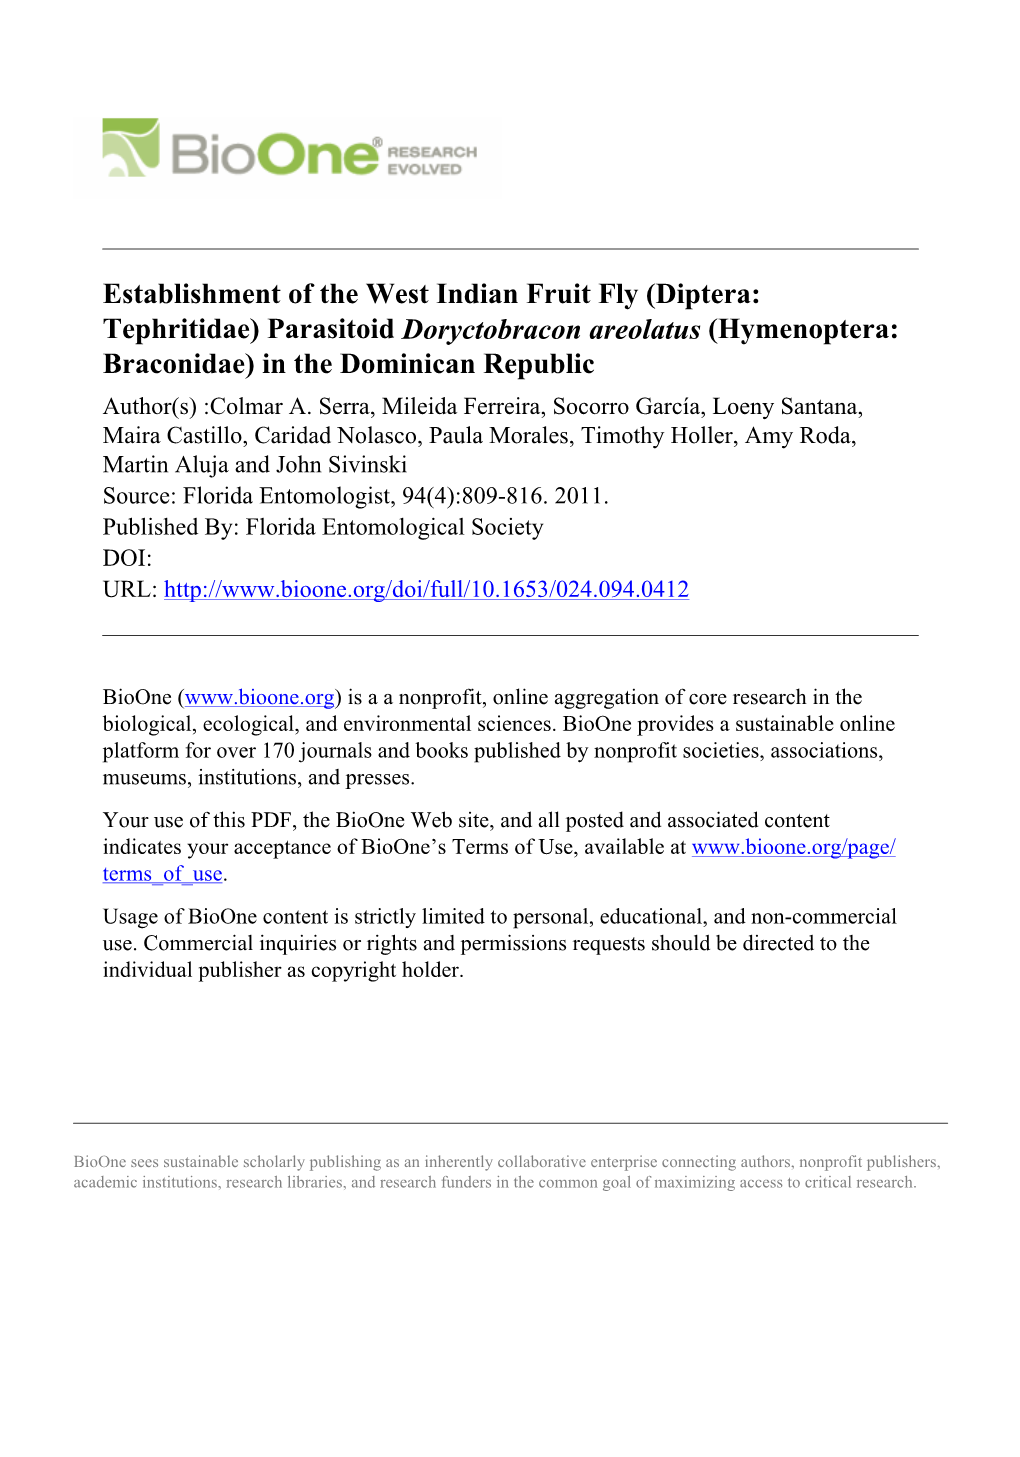 Establishment of the West Indian Fruit Fly (Diptera: Tephritidae)